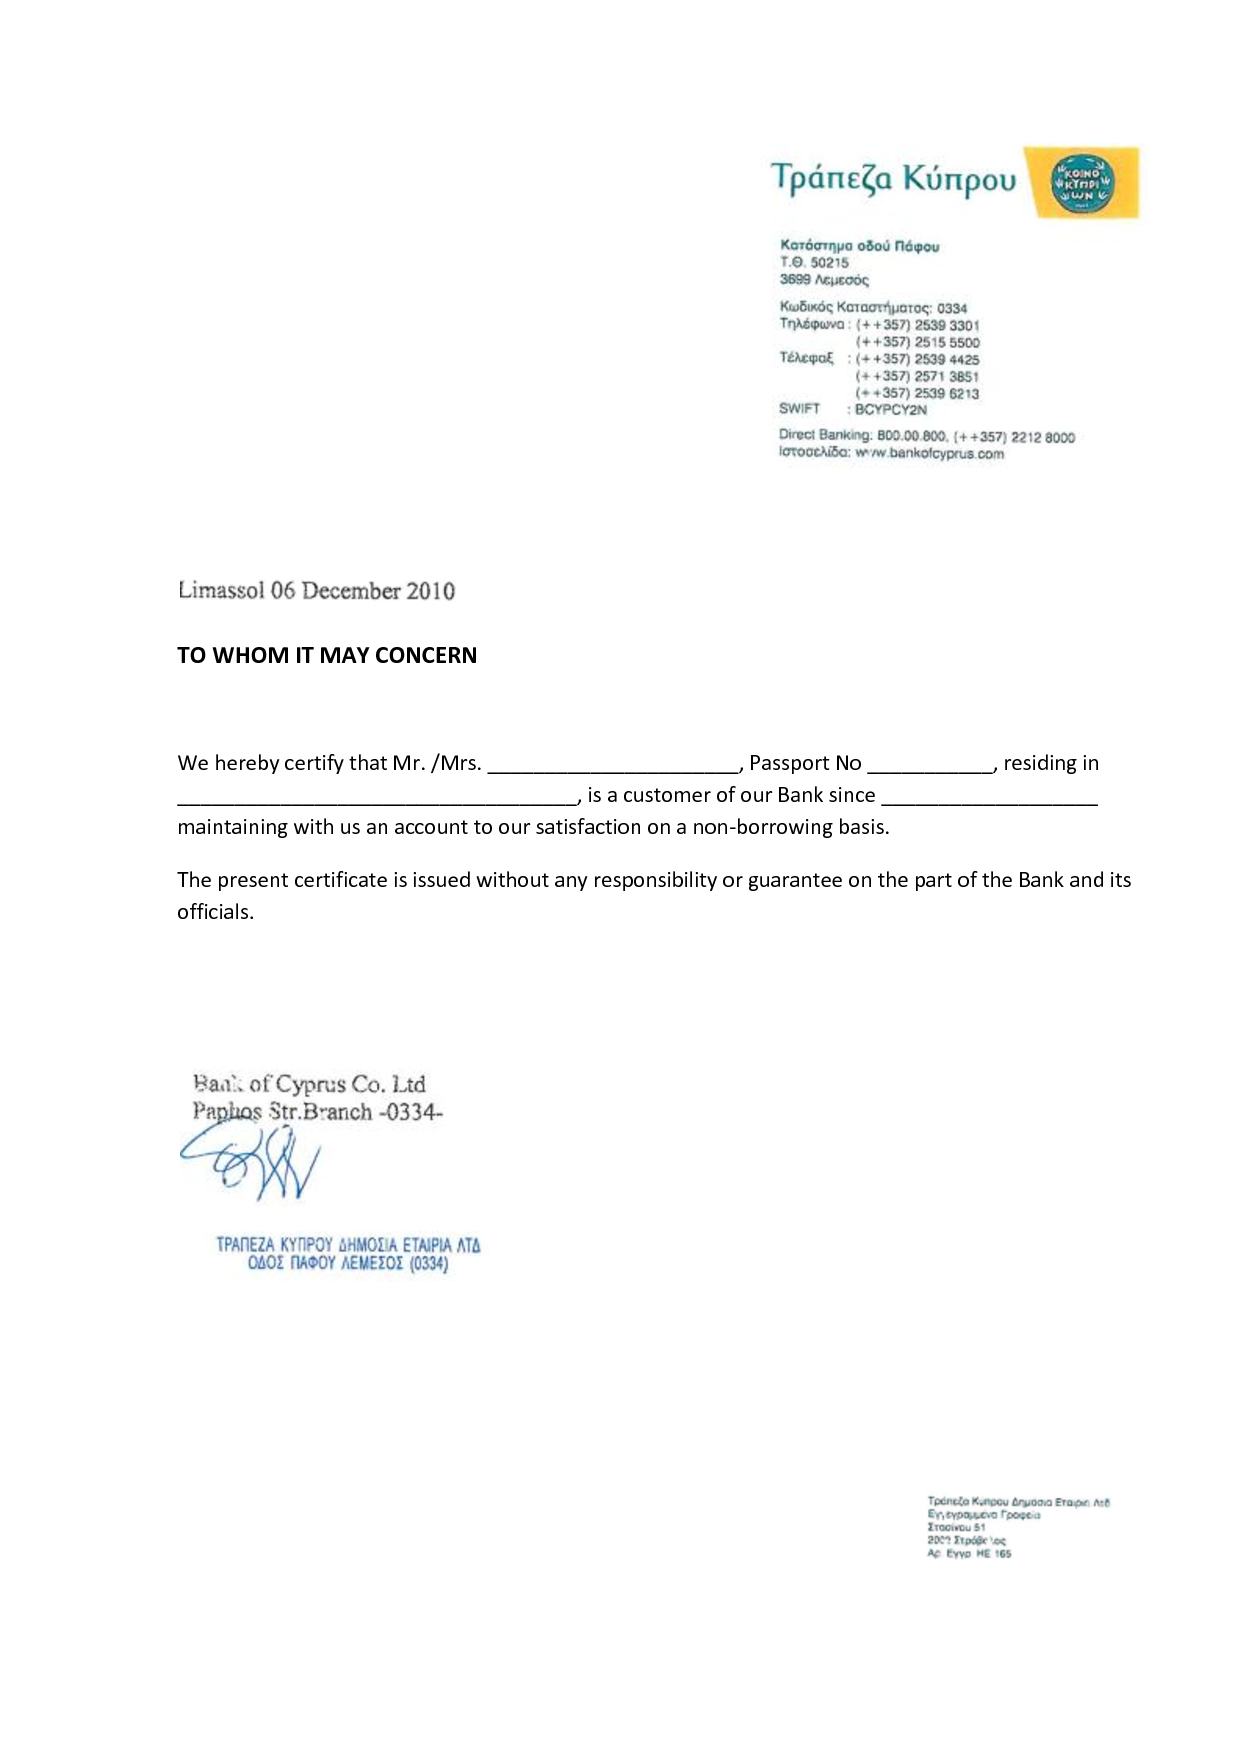 Recommendation Letter Format For Bank Account Opening inside size 1240 X 1754